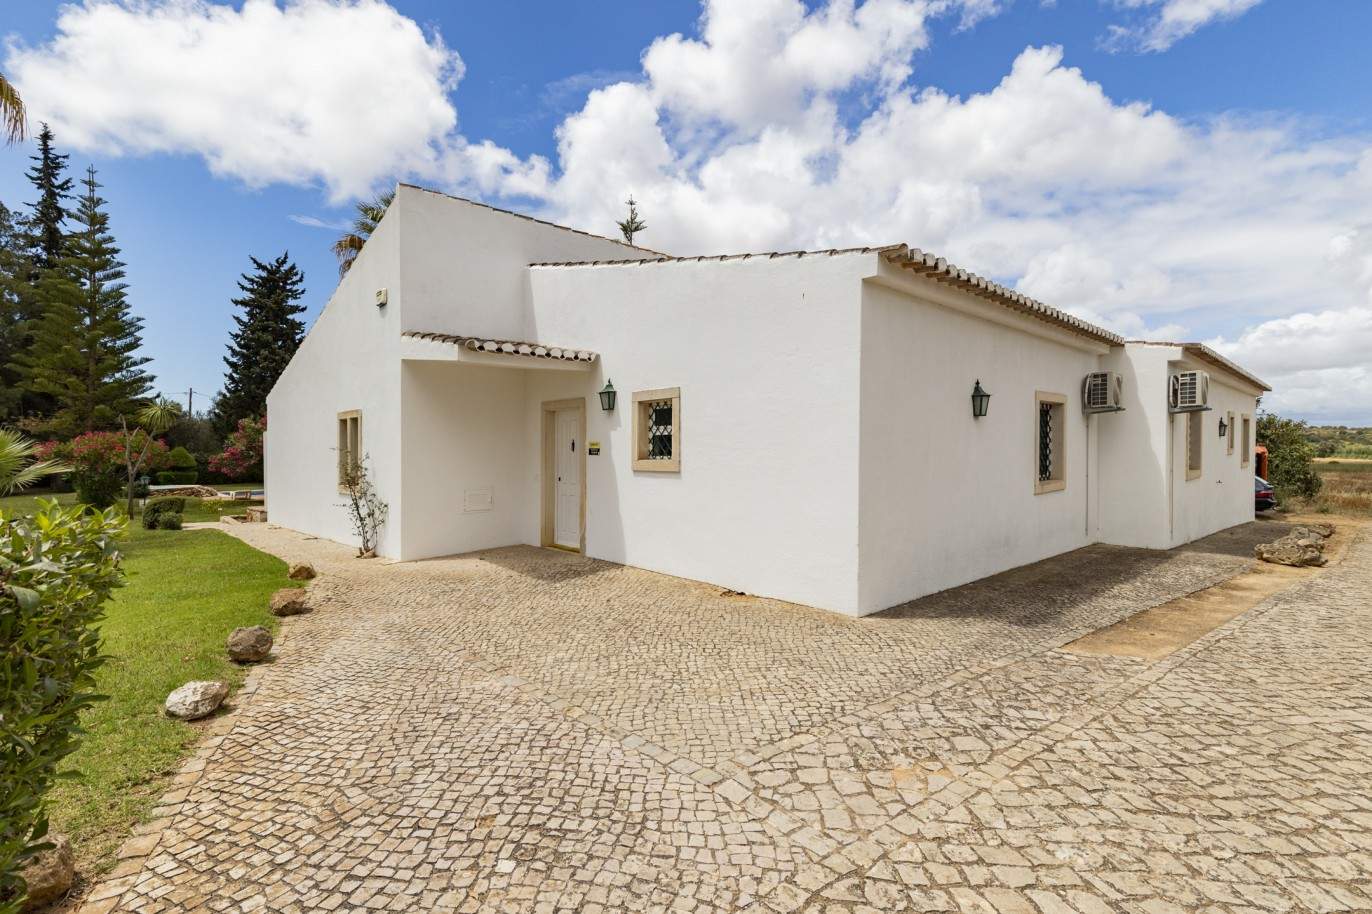 Rustic 5 bedrooms villa with pool and orchard, for sale in Pêra, Algarve_201838